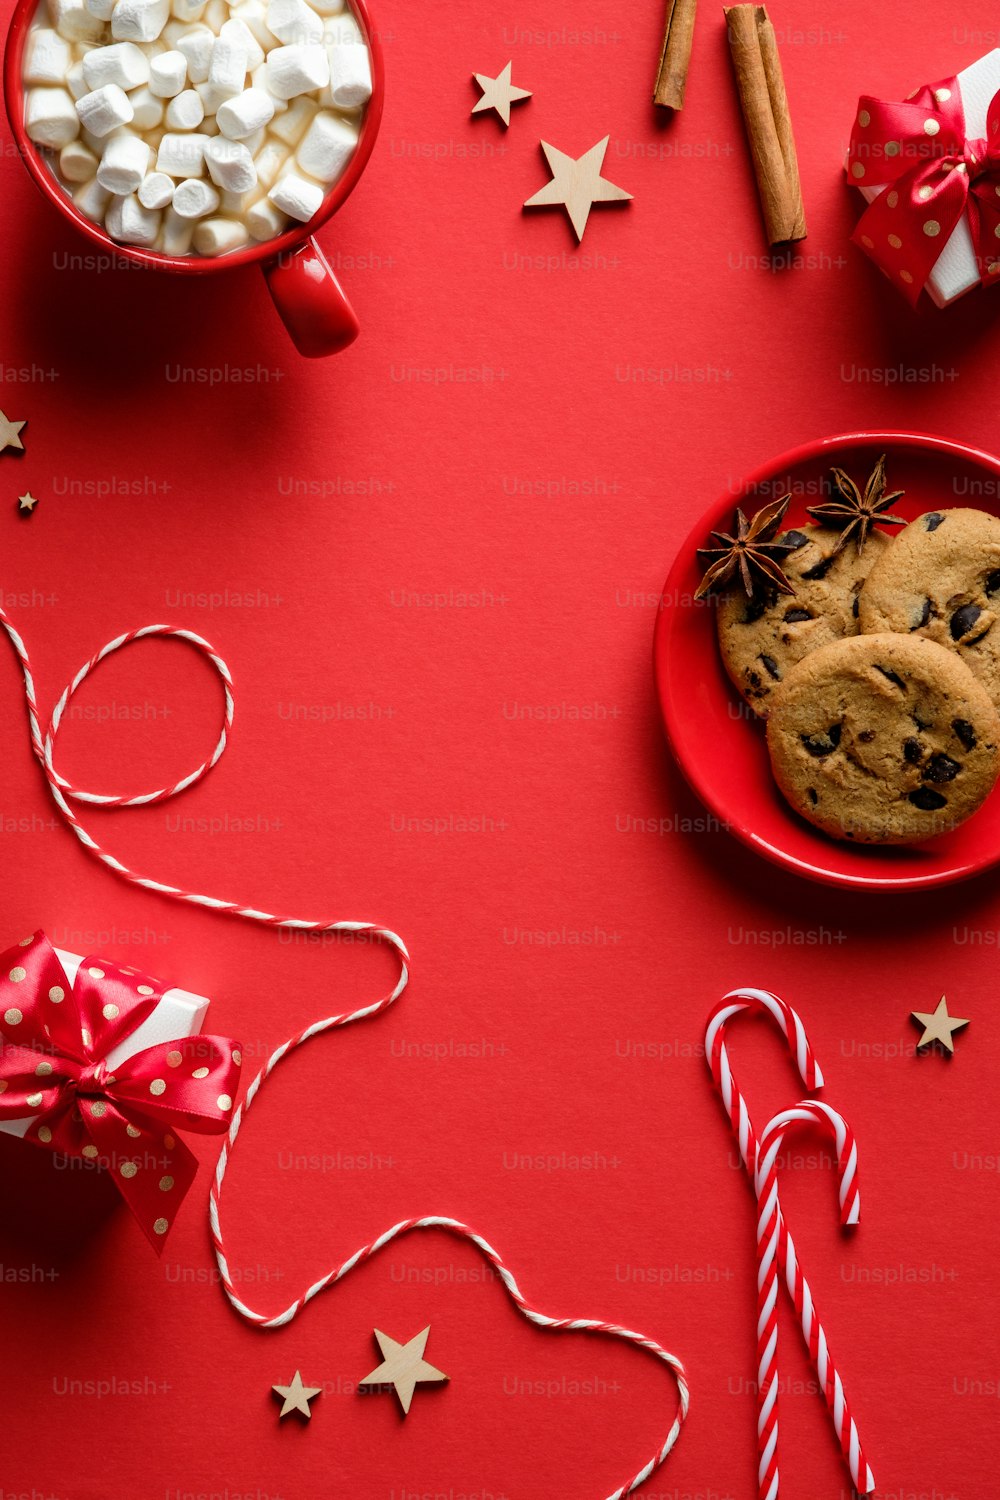 Christmas composition with oatmeal cookies, candy canes, cinnamon sticks, hot chocolate with marshmallows, wooden stars decorations on red background. Flat lay, top view